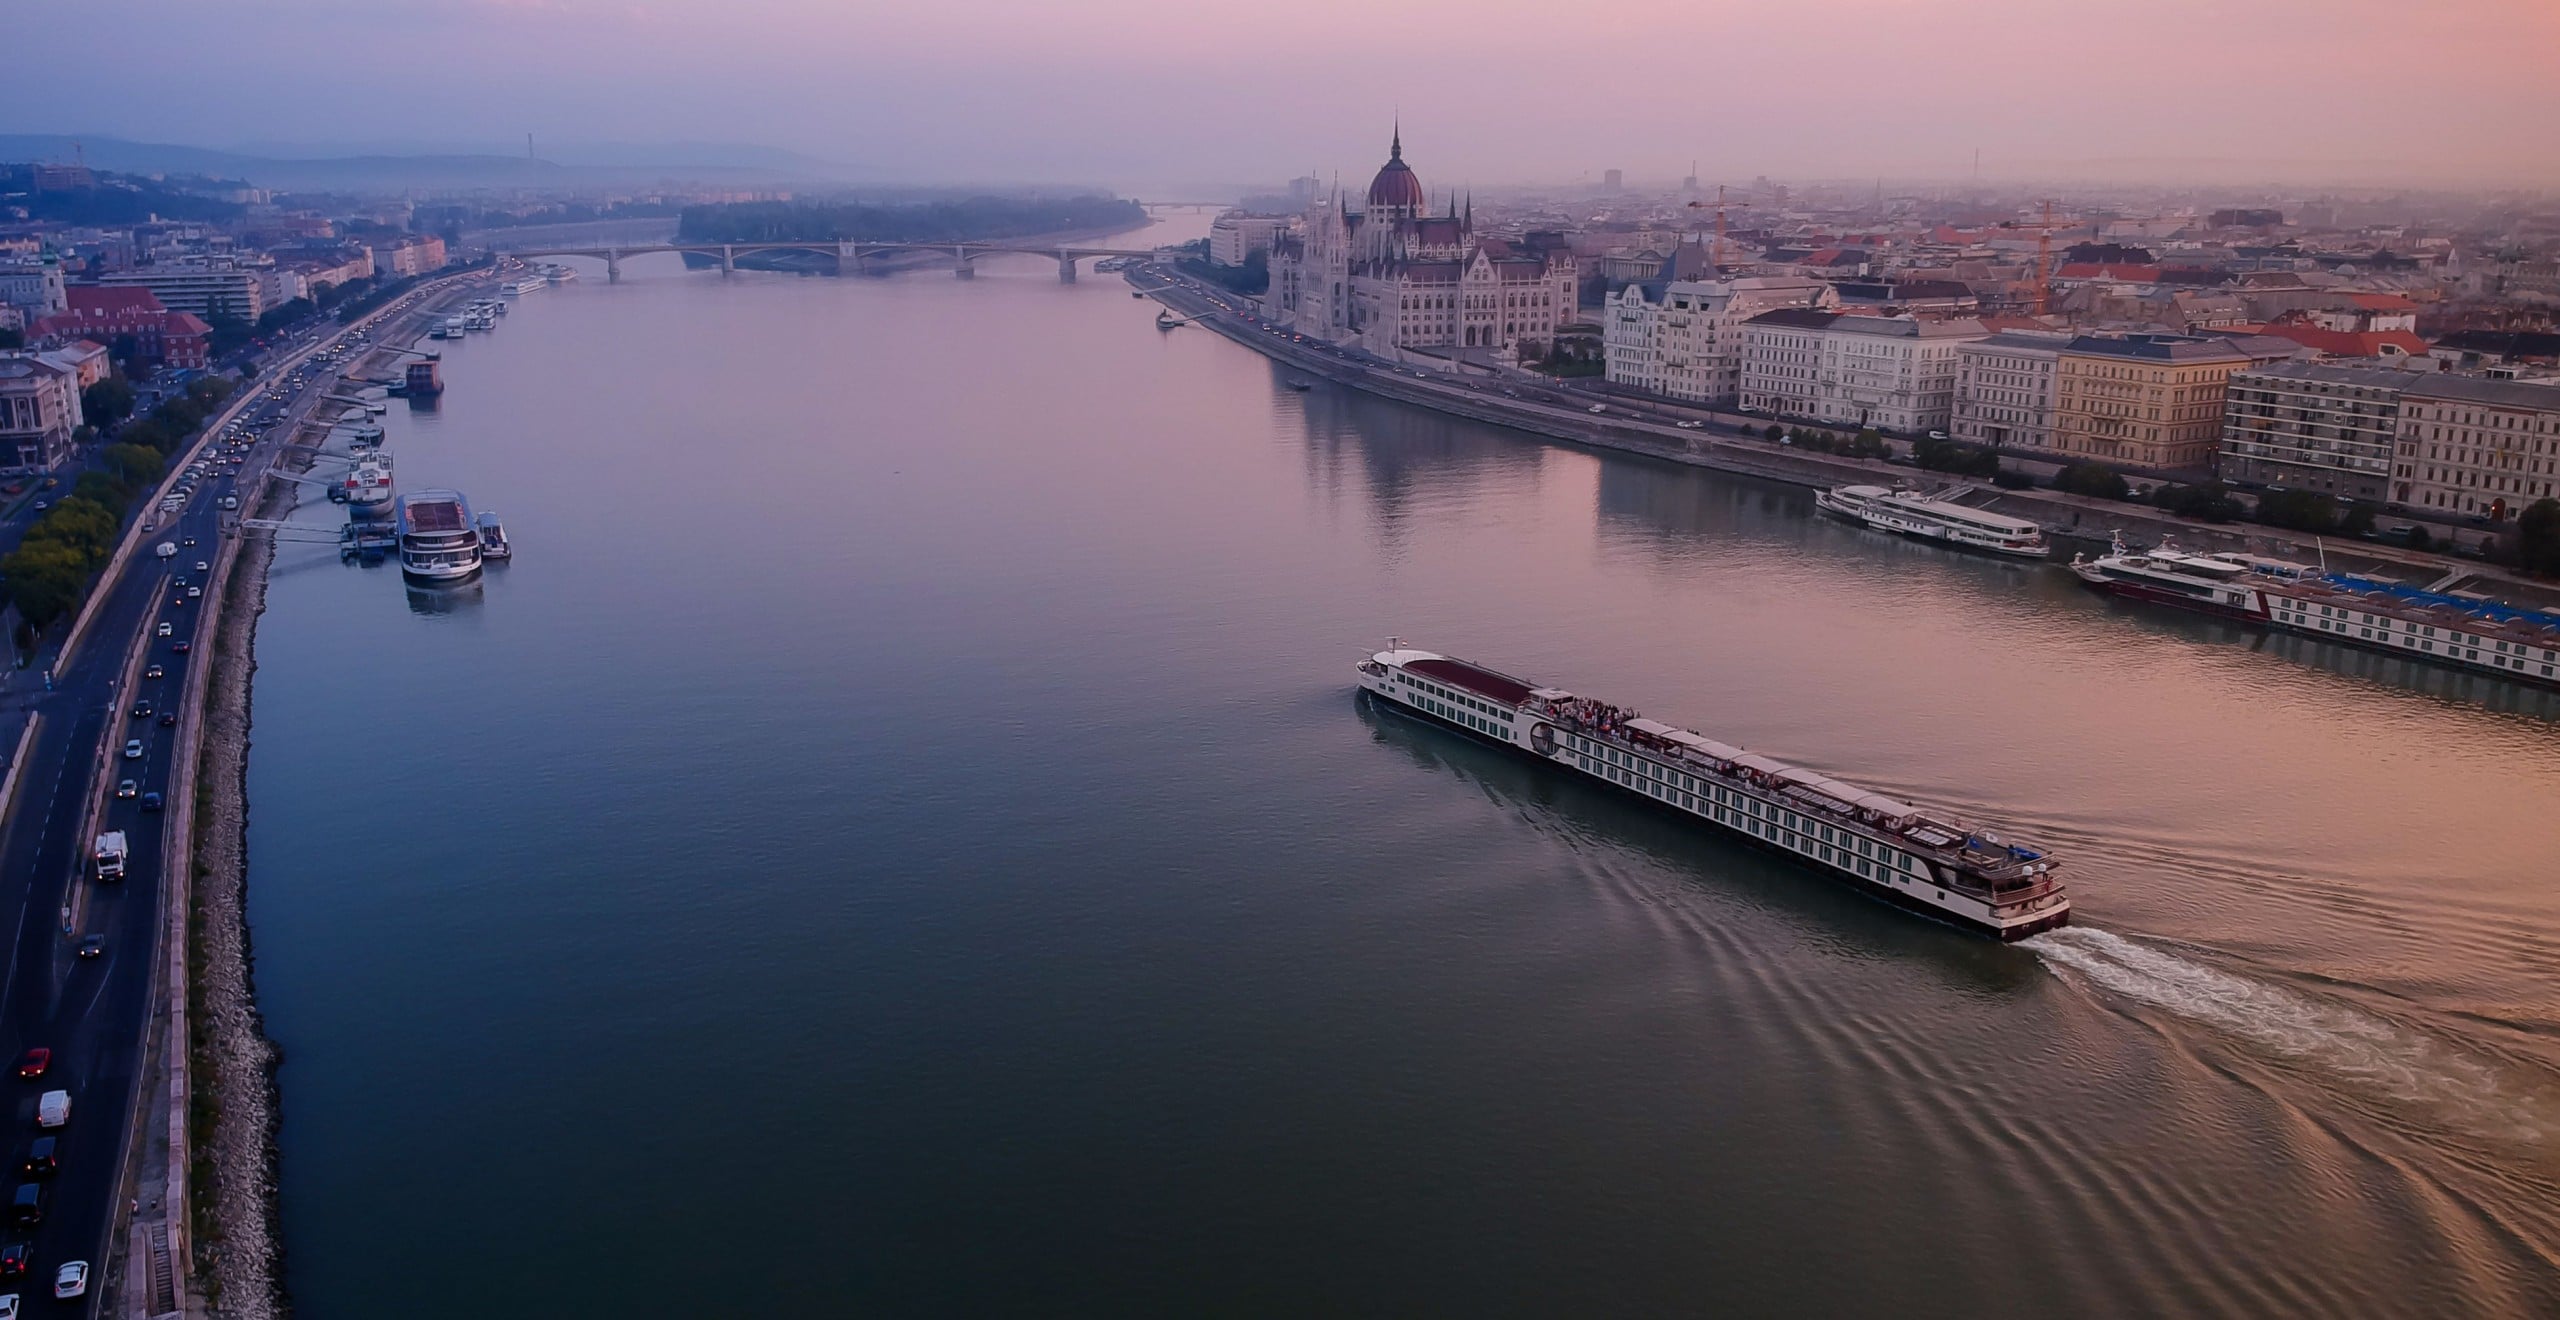 A river cruise is about to go past the Hungarian Parliament Building in an early morning. Image: Getty